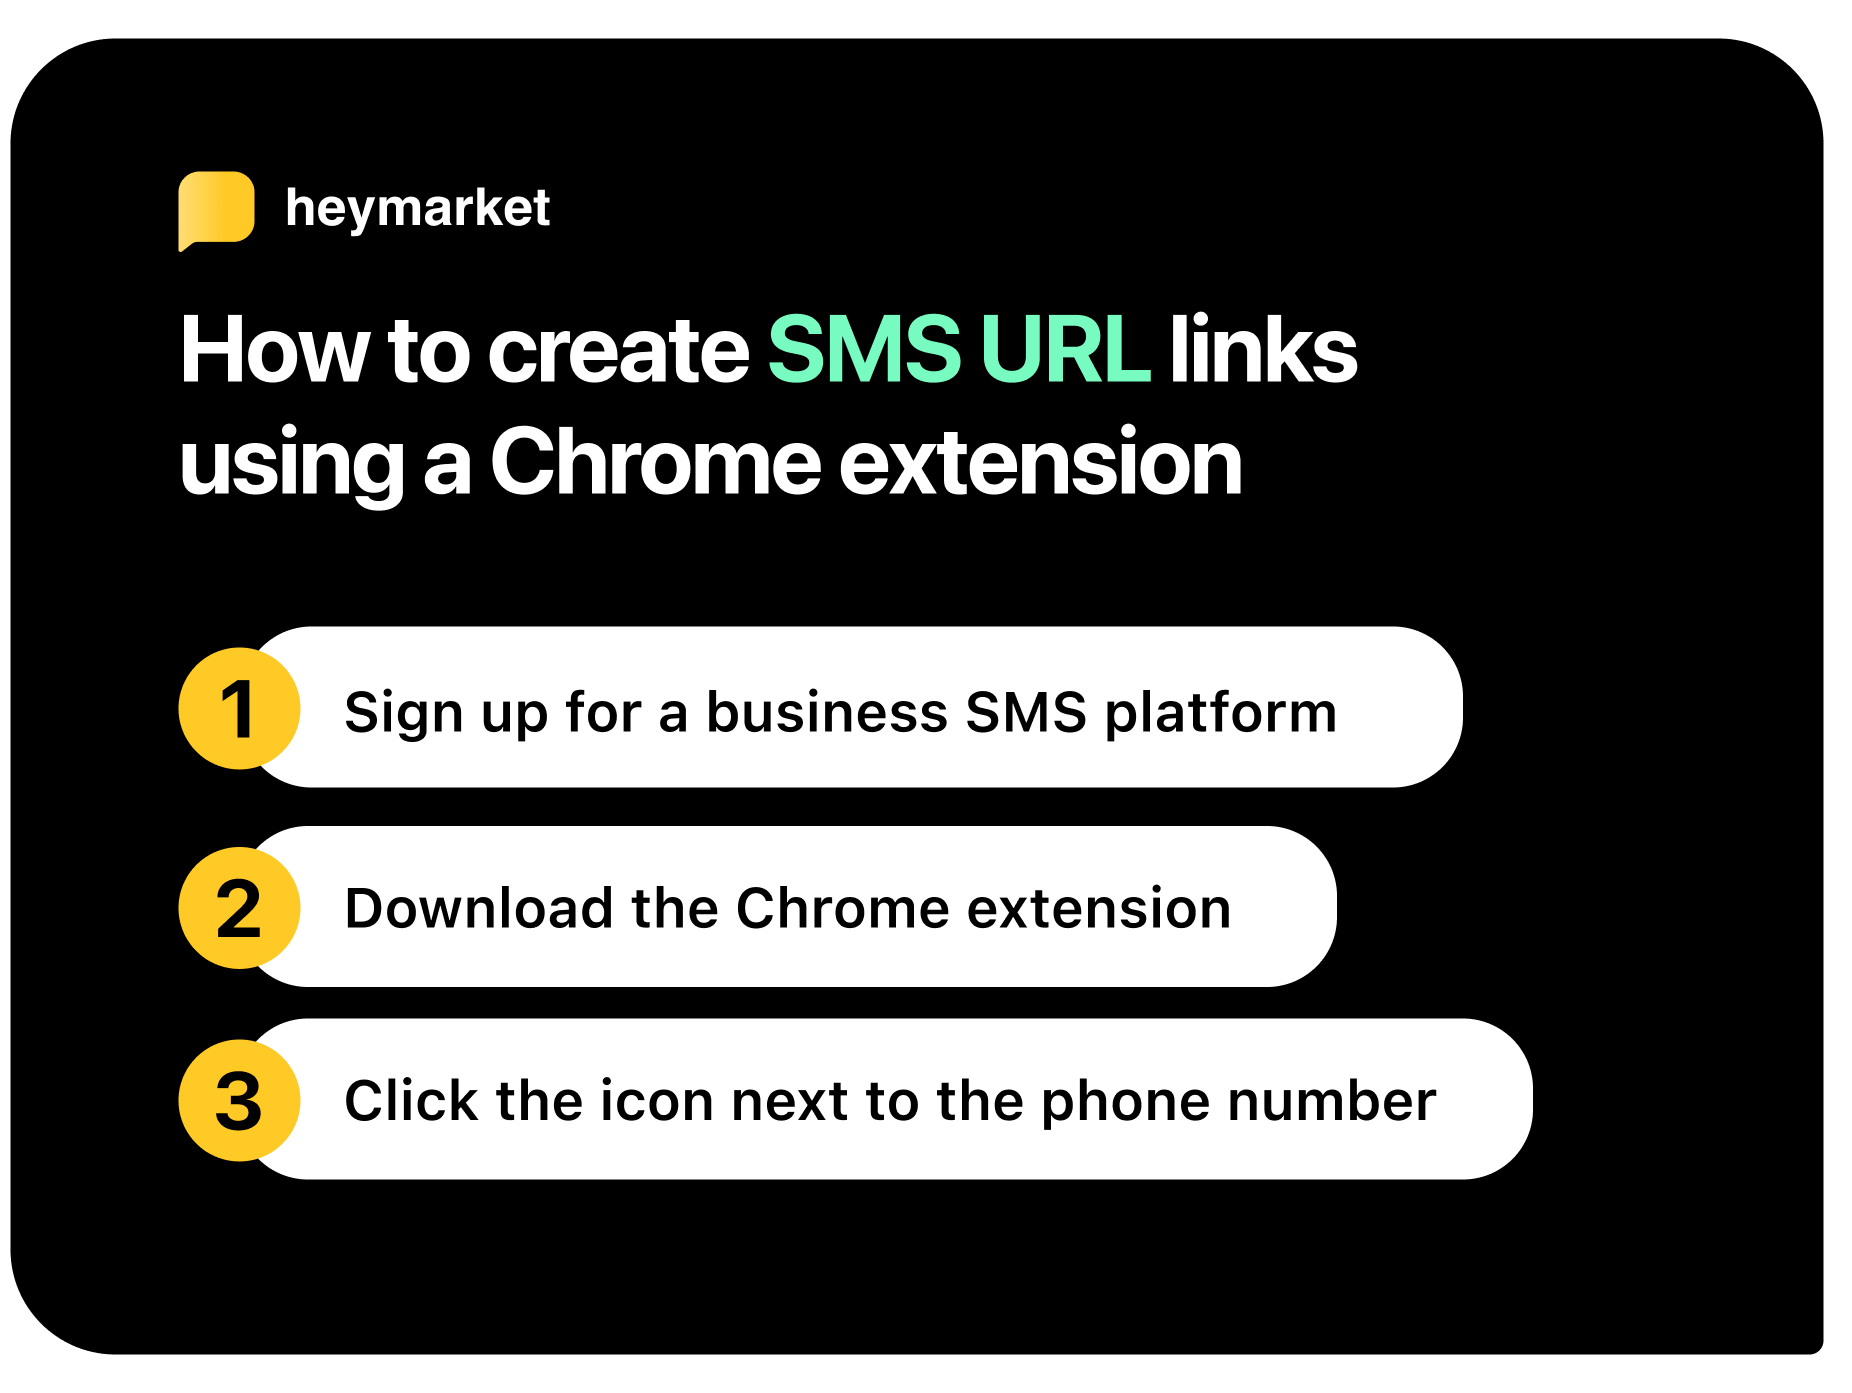 How to create an SMS URL using a Chrome extension